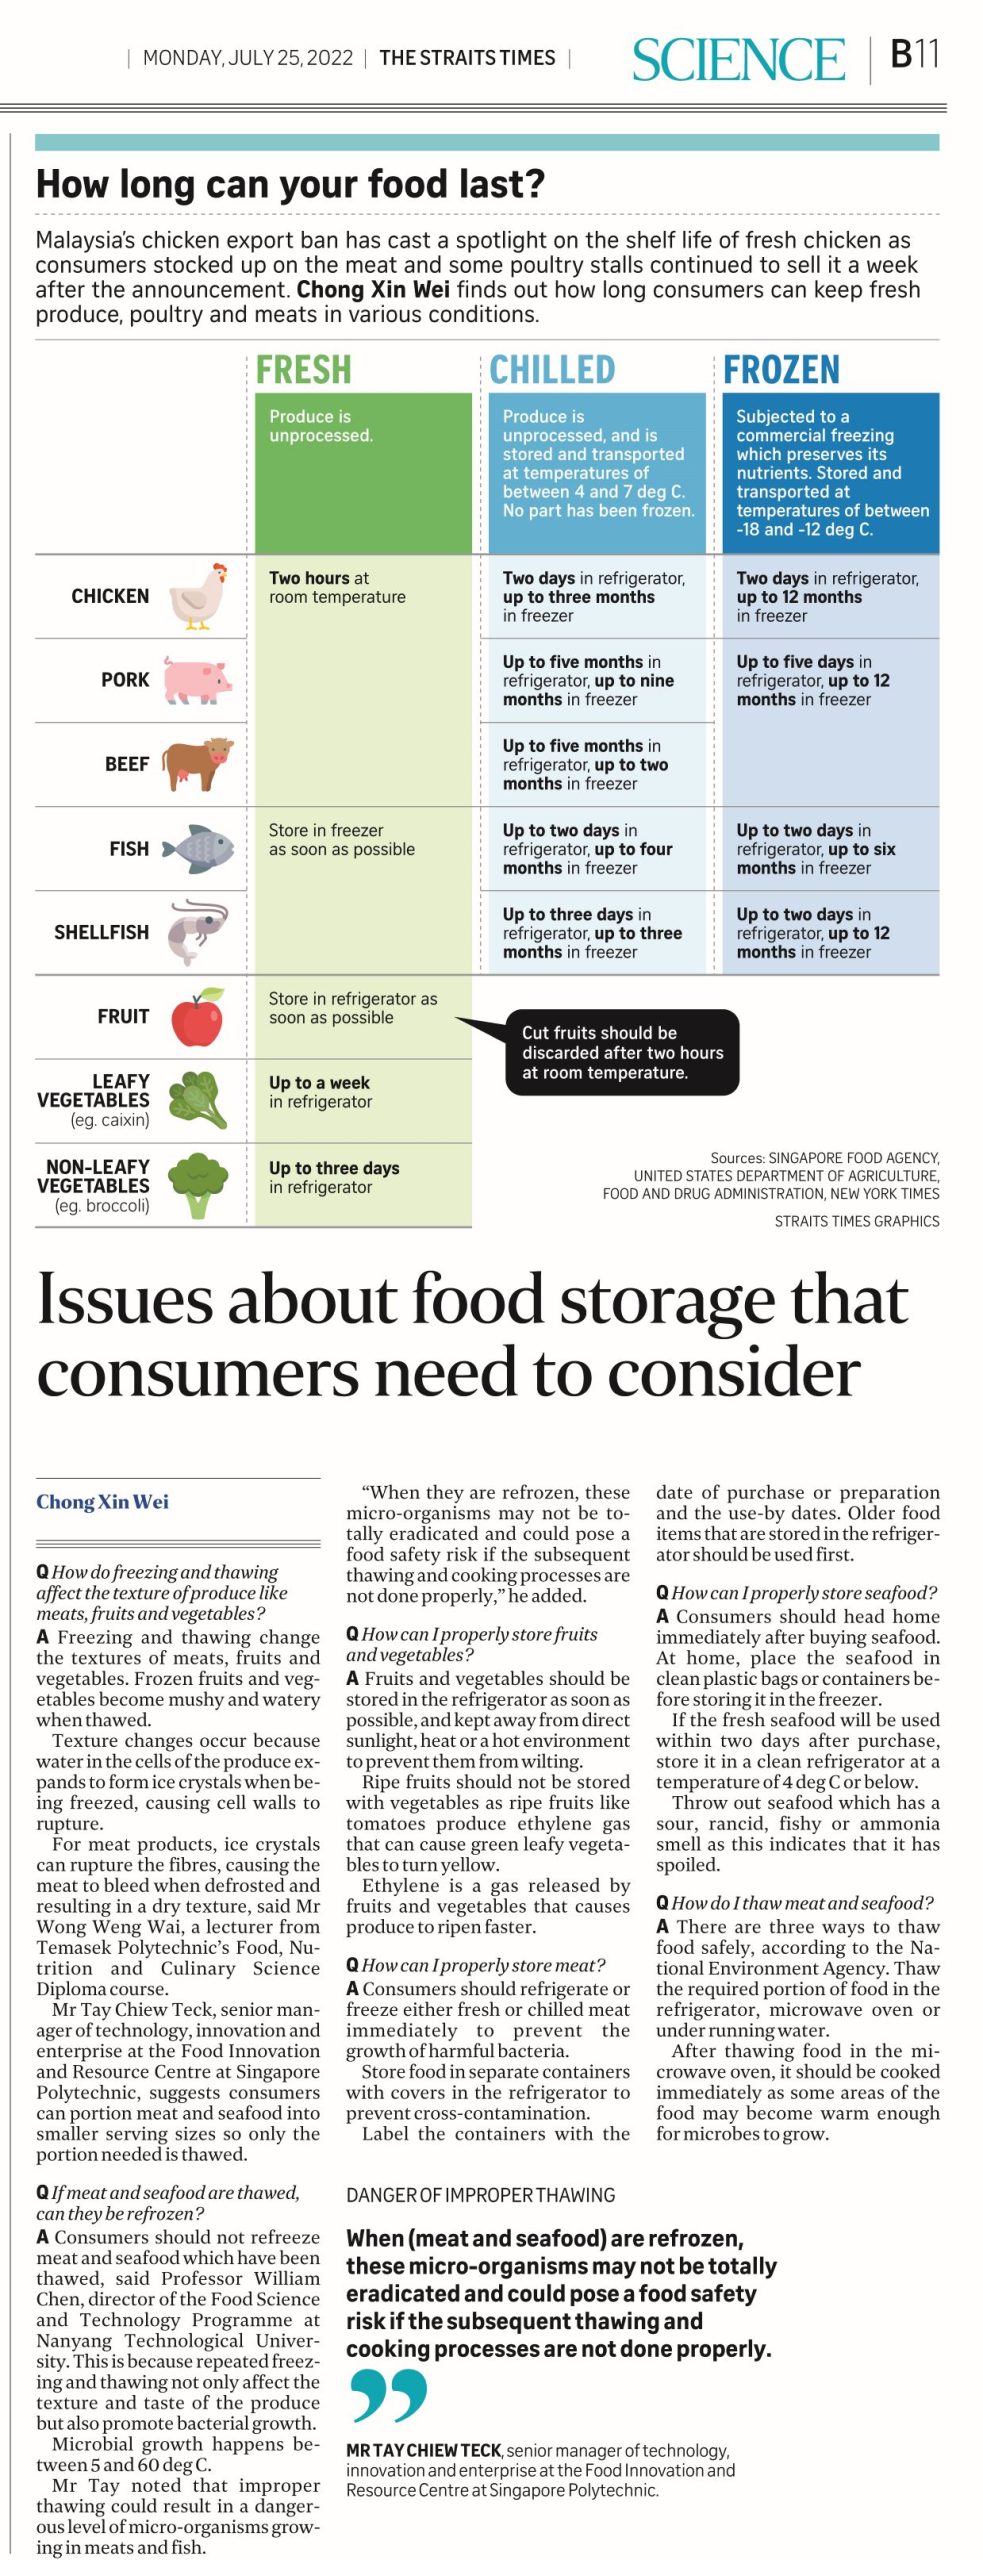 Issues-about-food-storage-that-consumers-need-to-consider-25-July-2022-resize-scaled